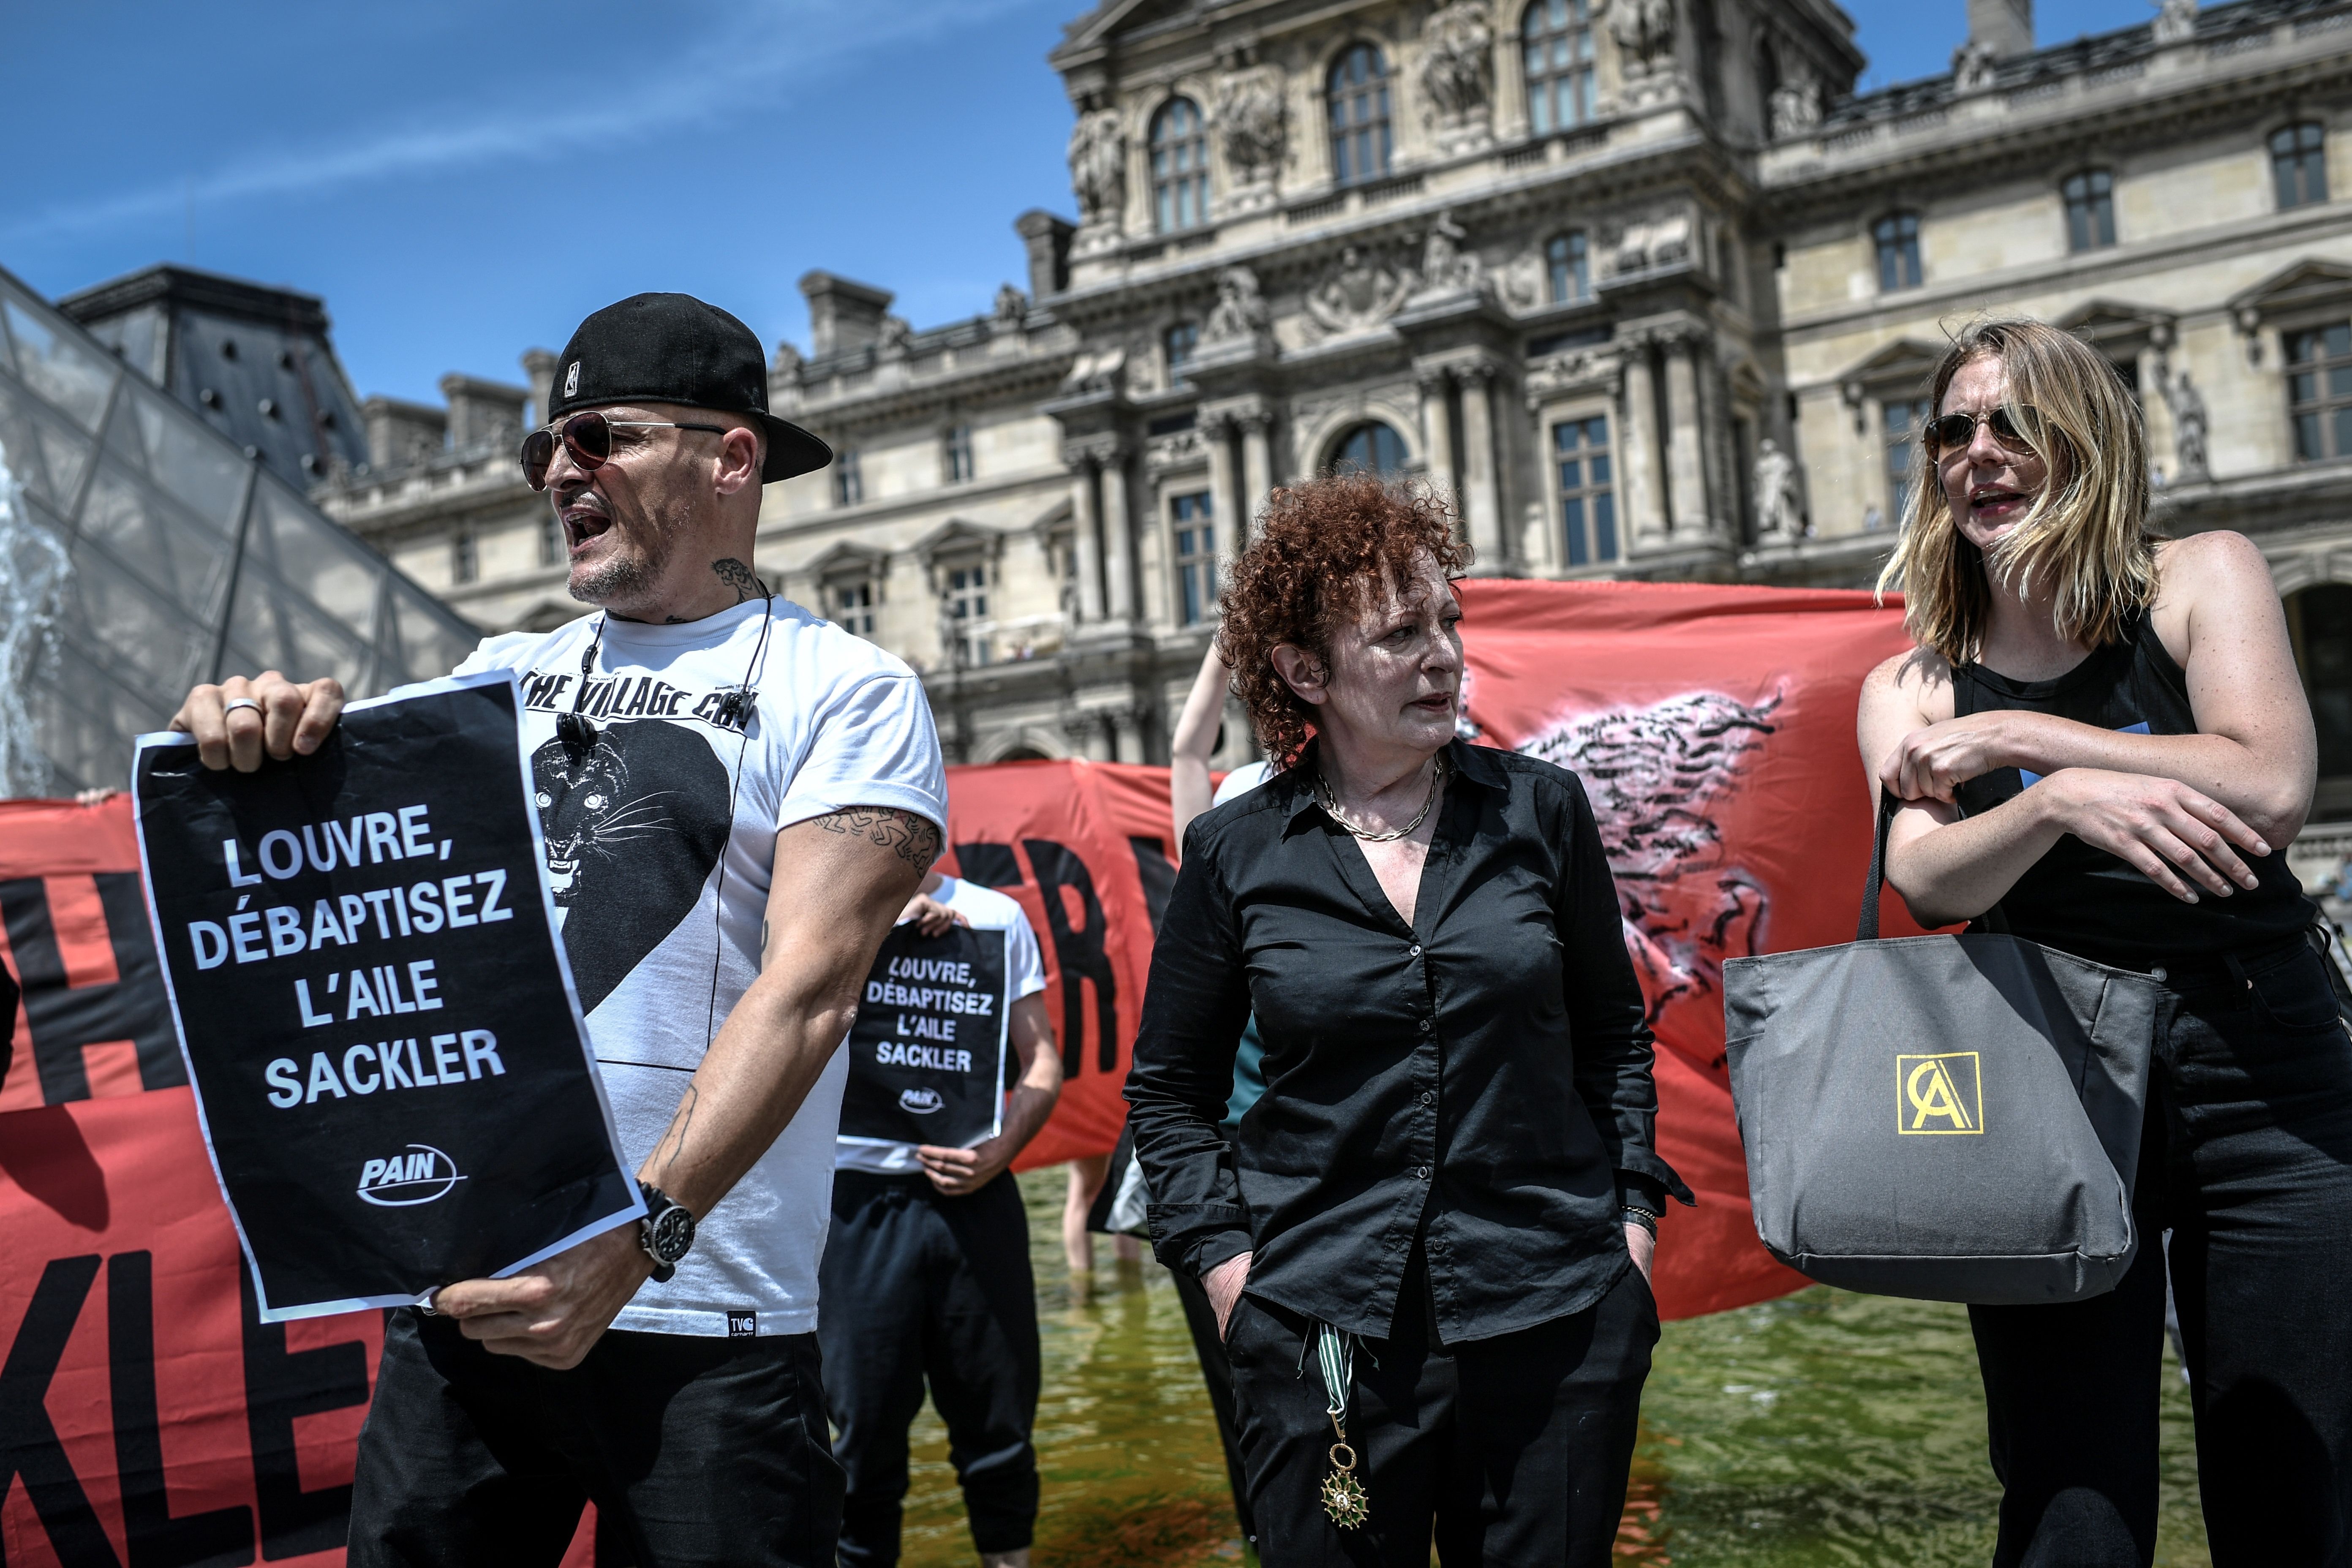 Nancy Goldin (C), photographer and founder of P.A.I.N. (Prescription Addiction Intervention Now) association - created to respond to the opioid crisis - and Fred Bladou (L), mission head of French NGO Aides, take part in a protest on July 1, 2019 in front of the Louvre museum in Paris, to condemn the museum's ties with the Sackler family, billionaire donors accused of pushing to sell a highly addictive painkiller blamed for tens of thousands of deaths. (STEPHANE DE SAKUTIN/AFP/Getty Images)